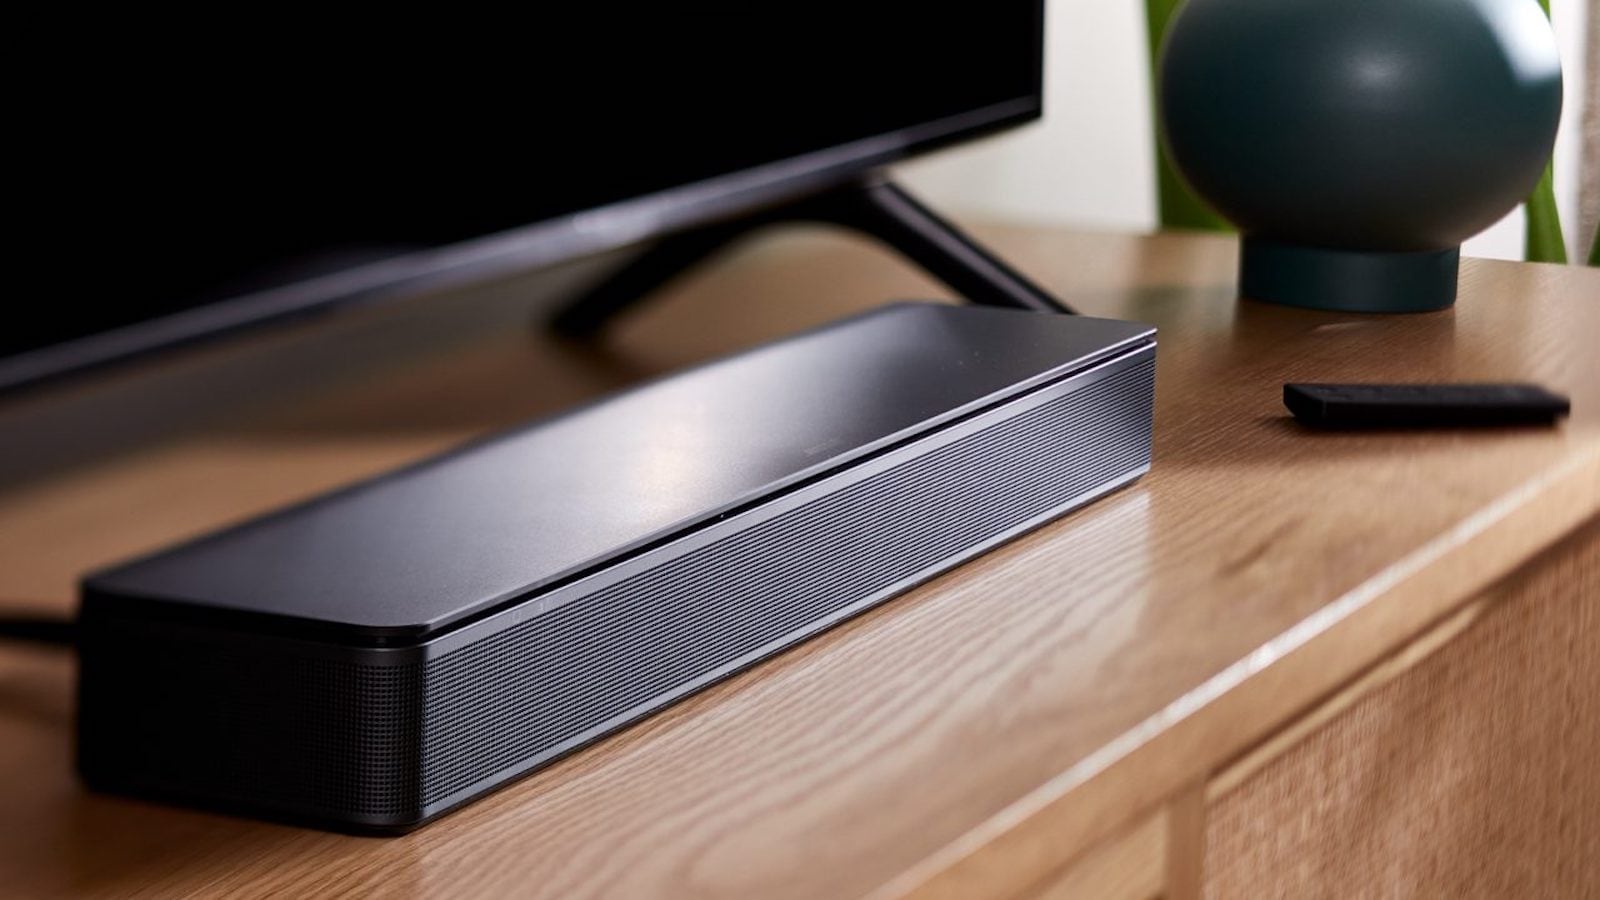 TV Speaker media sound system sets up just one step and works with your remote » Gadget Flow